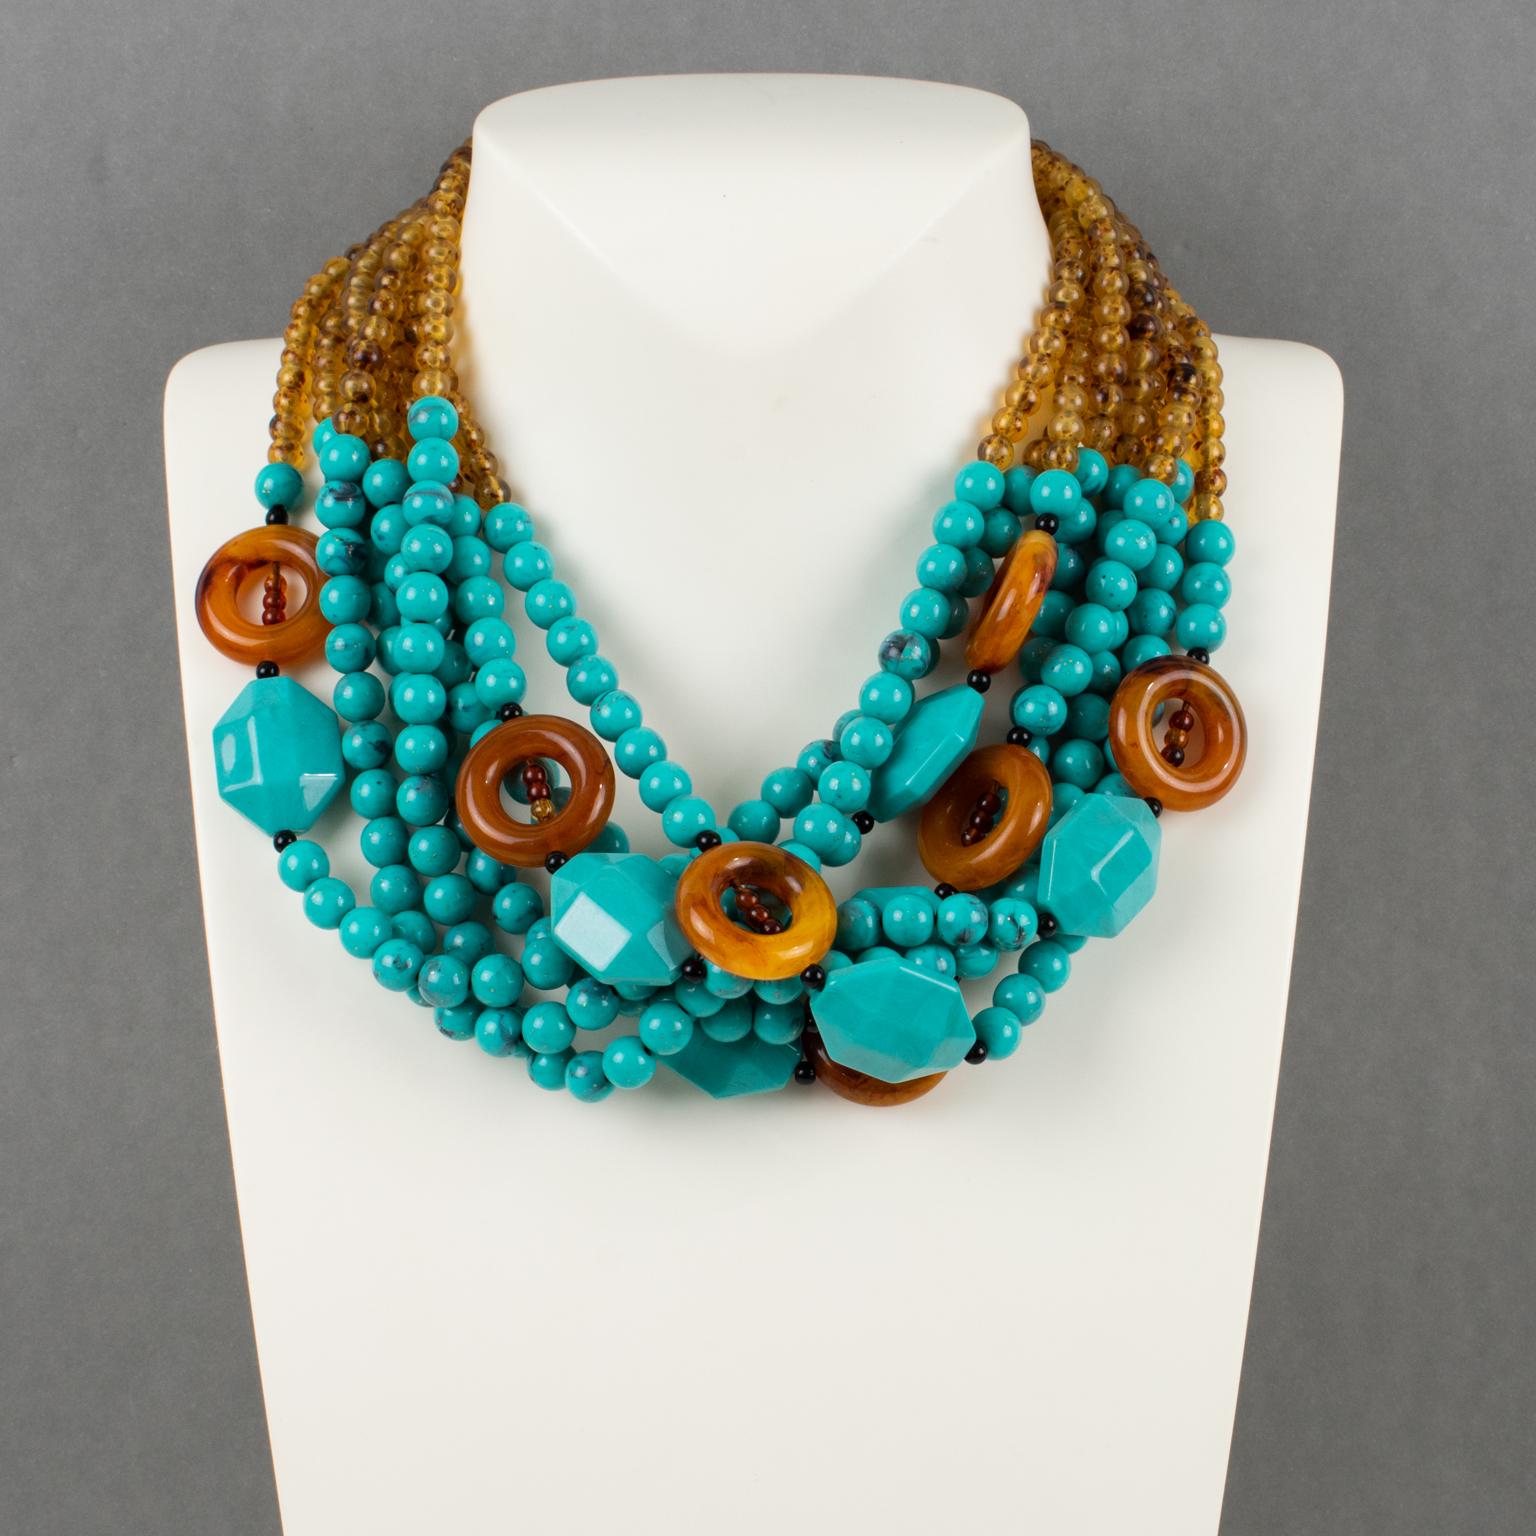 Modern Angela Caputi Resin Choker Necklace Turquoise and Brown Multi-Strand For Sale